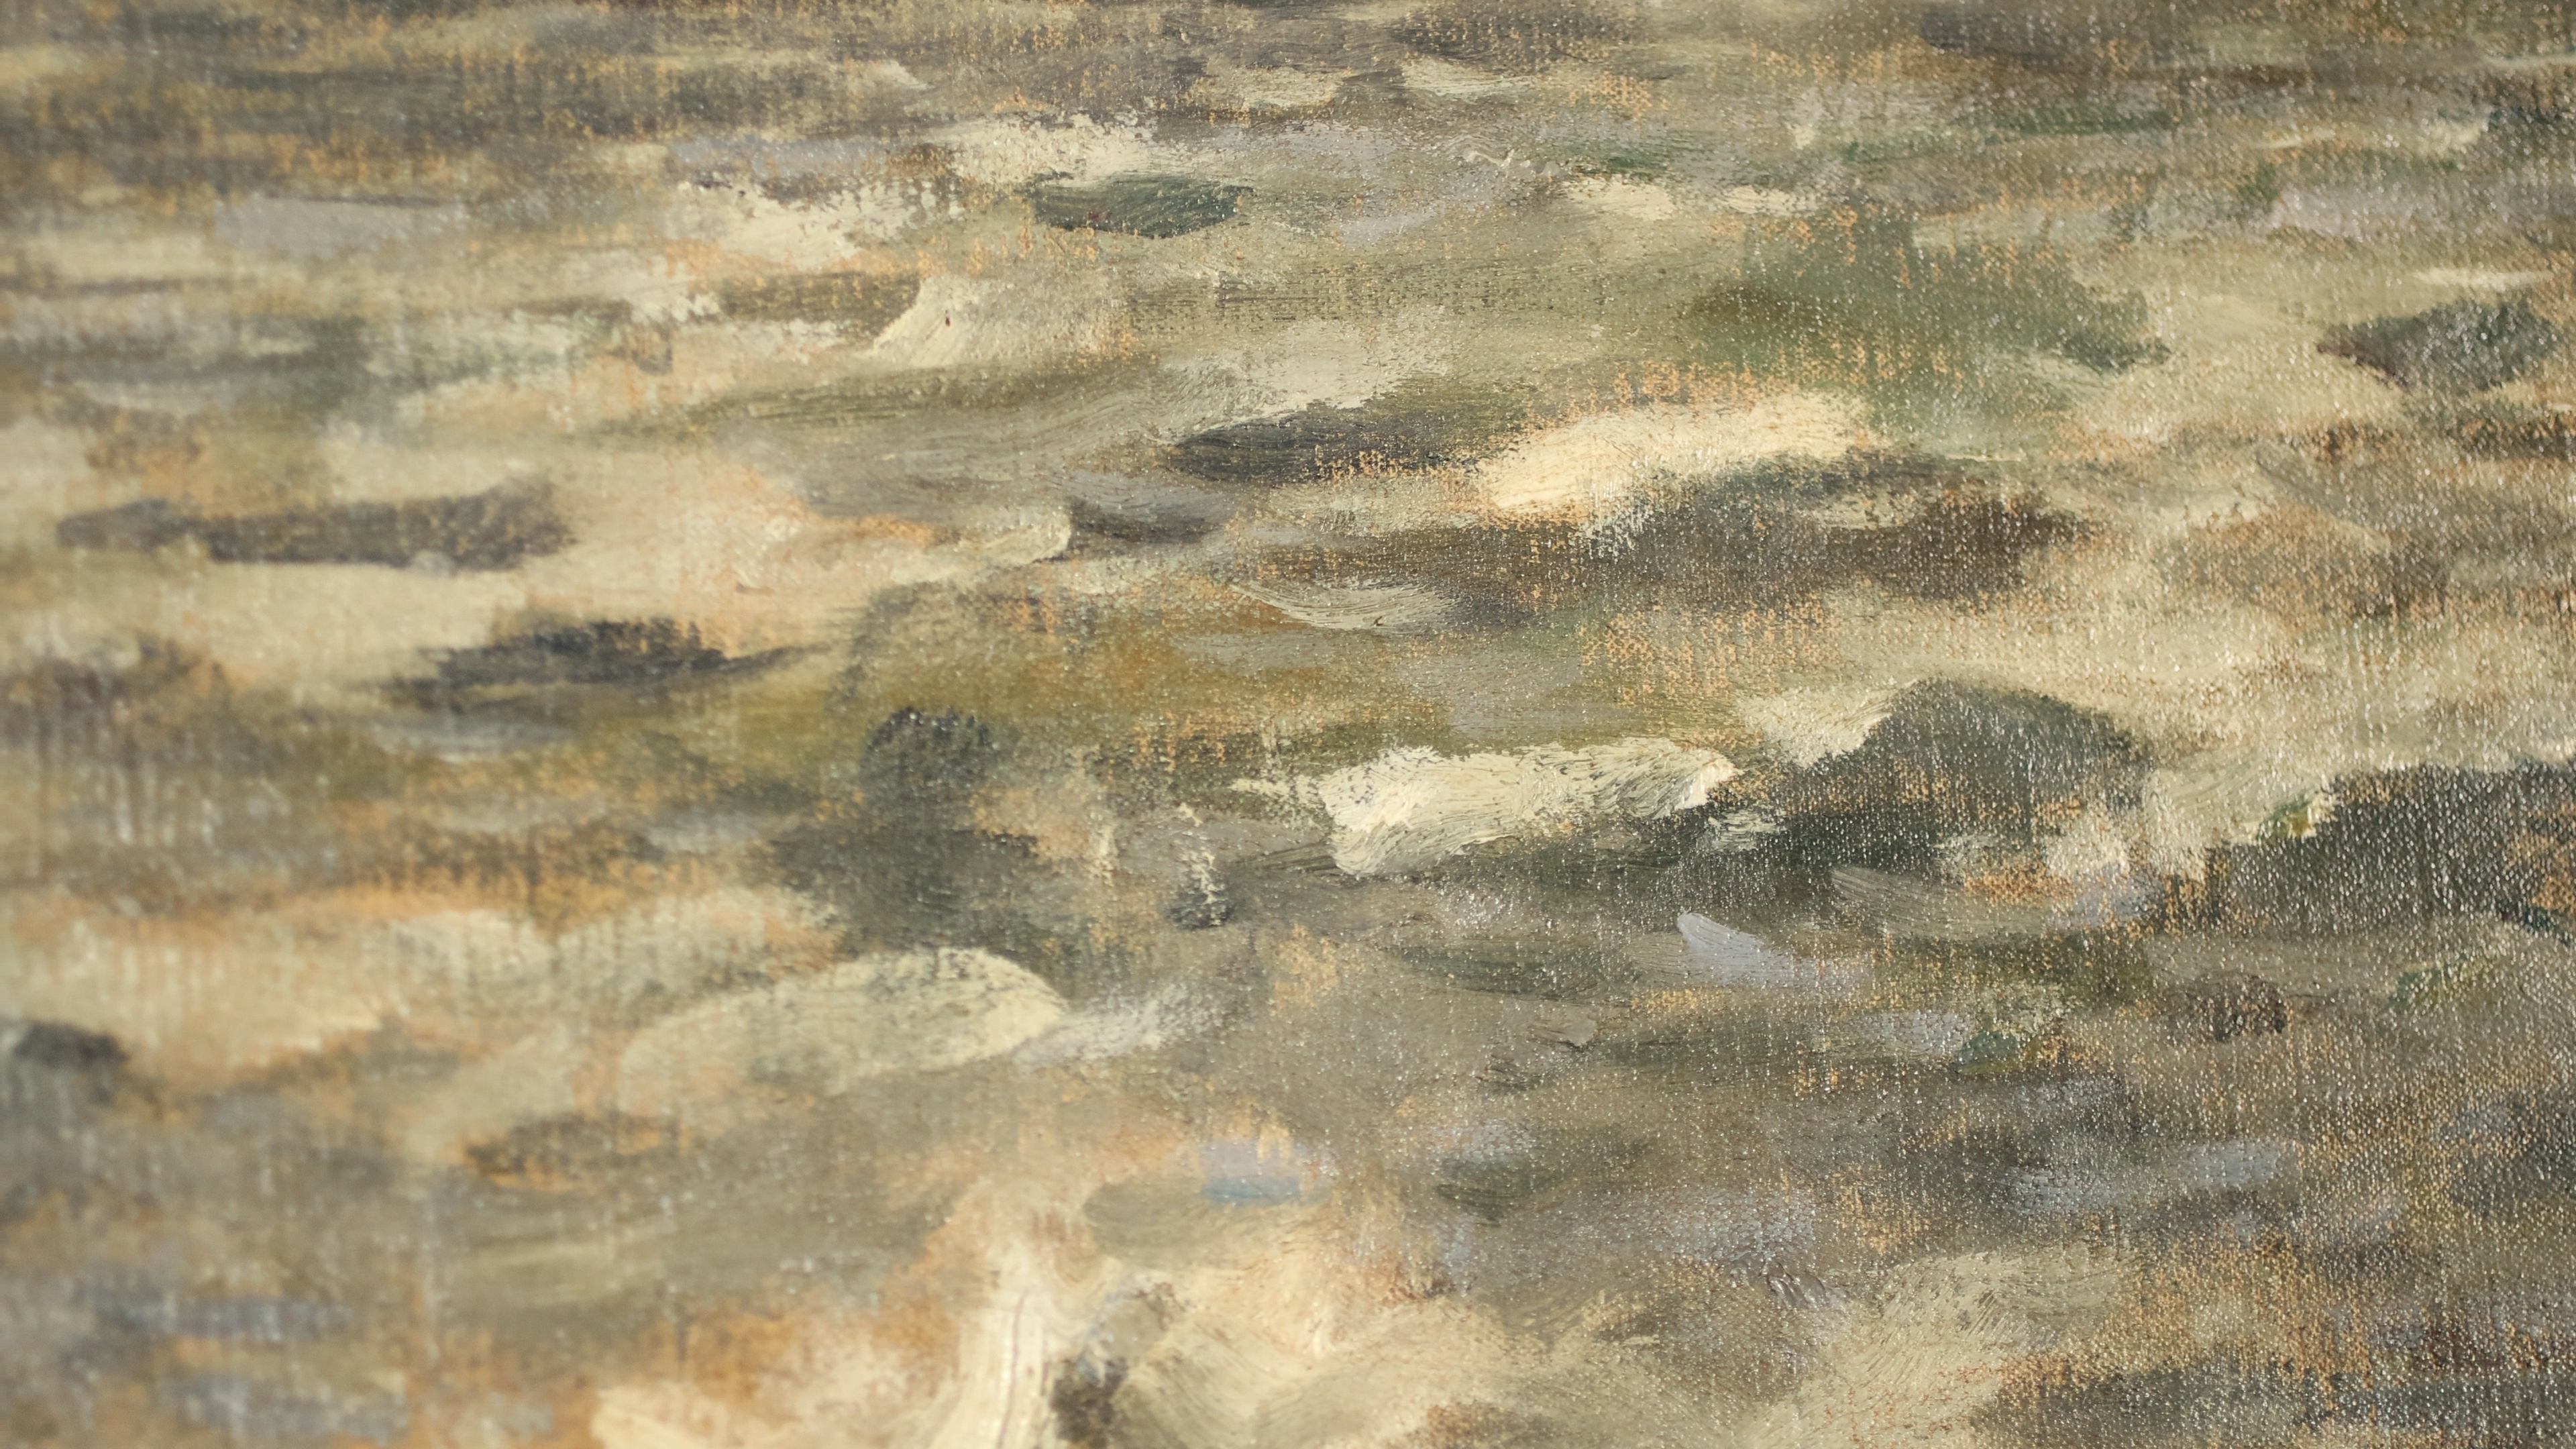 Detail of the water in the painting. Hitchcock has left some of the underpainting exposed and utilized a wide range of creamy whites, muted blues, greens, and even hints of purple to create the extremely effective feel of choppy waves in a harbor.